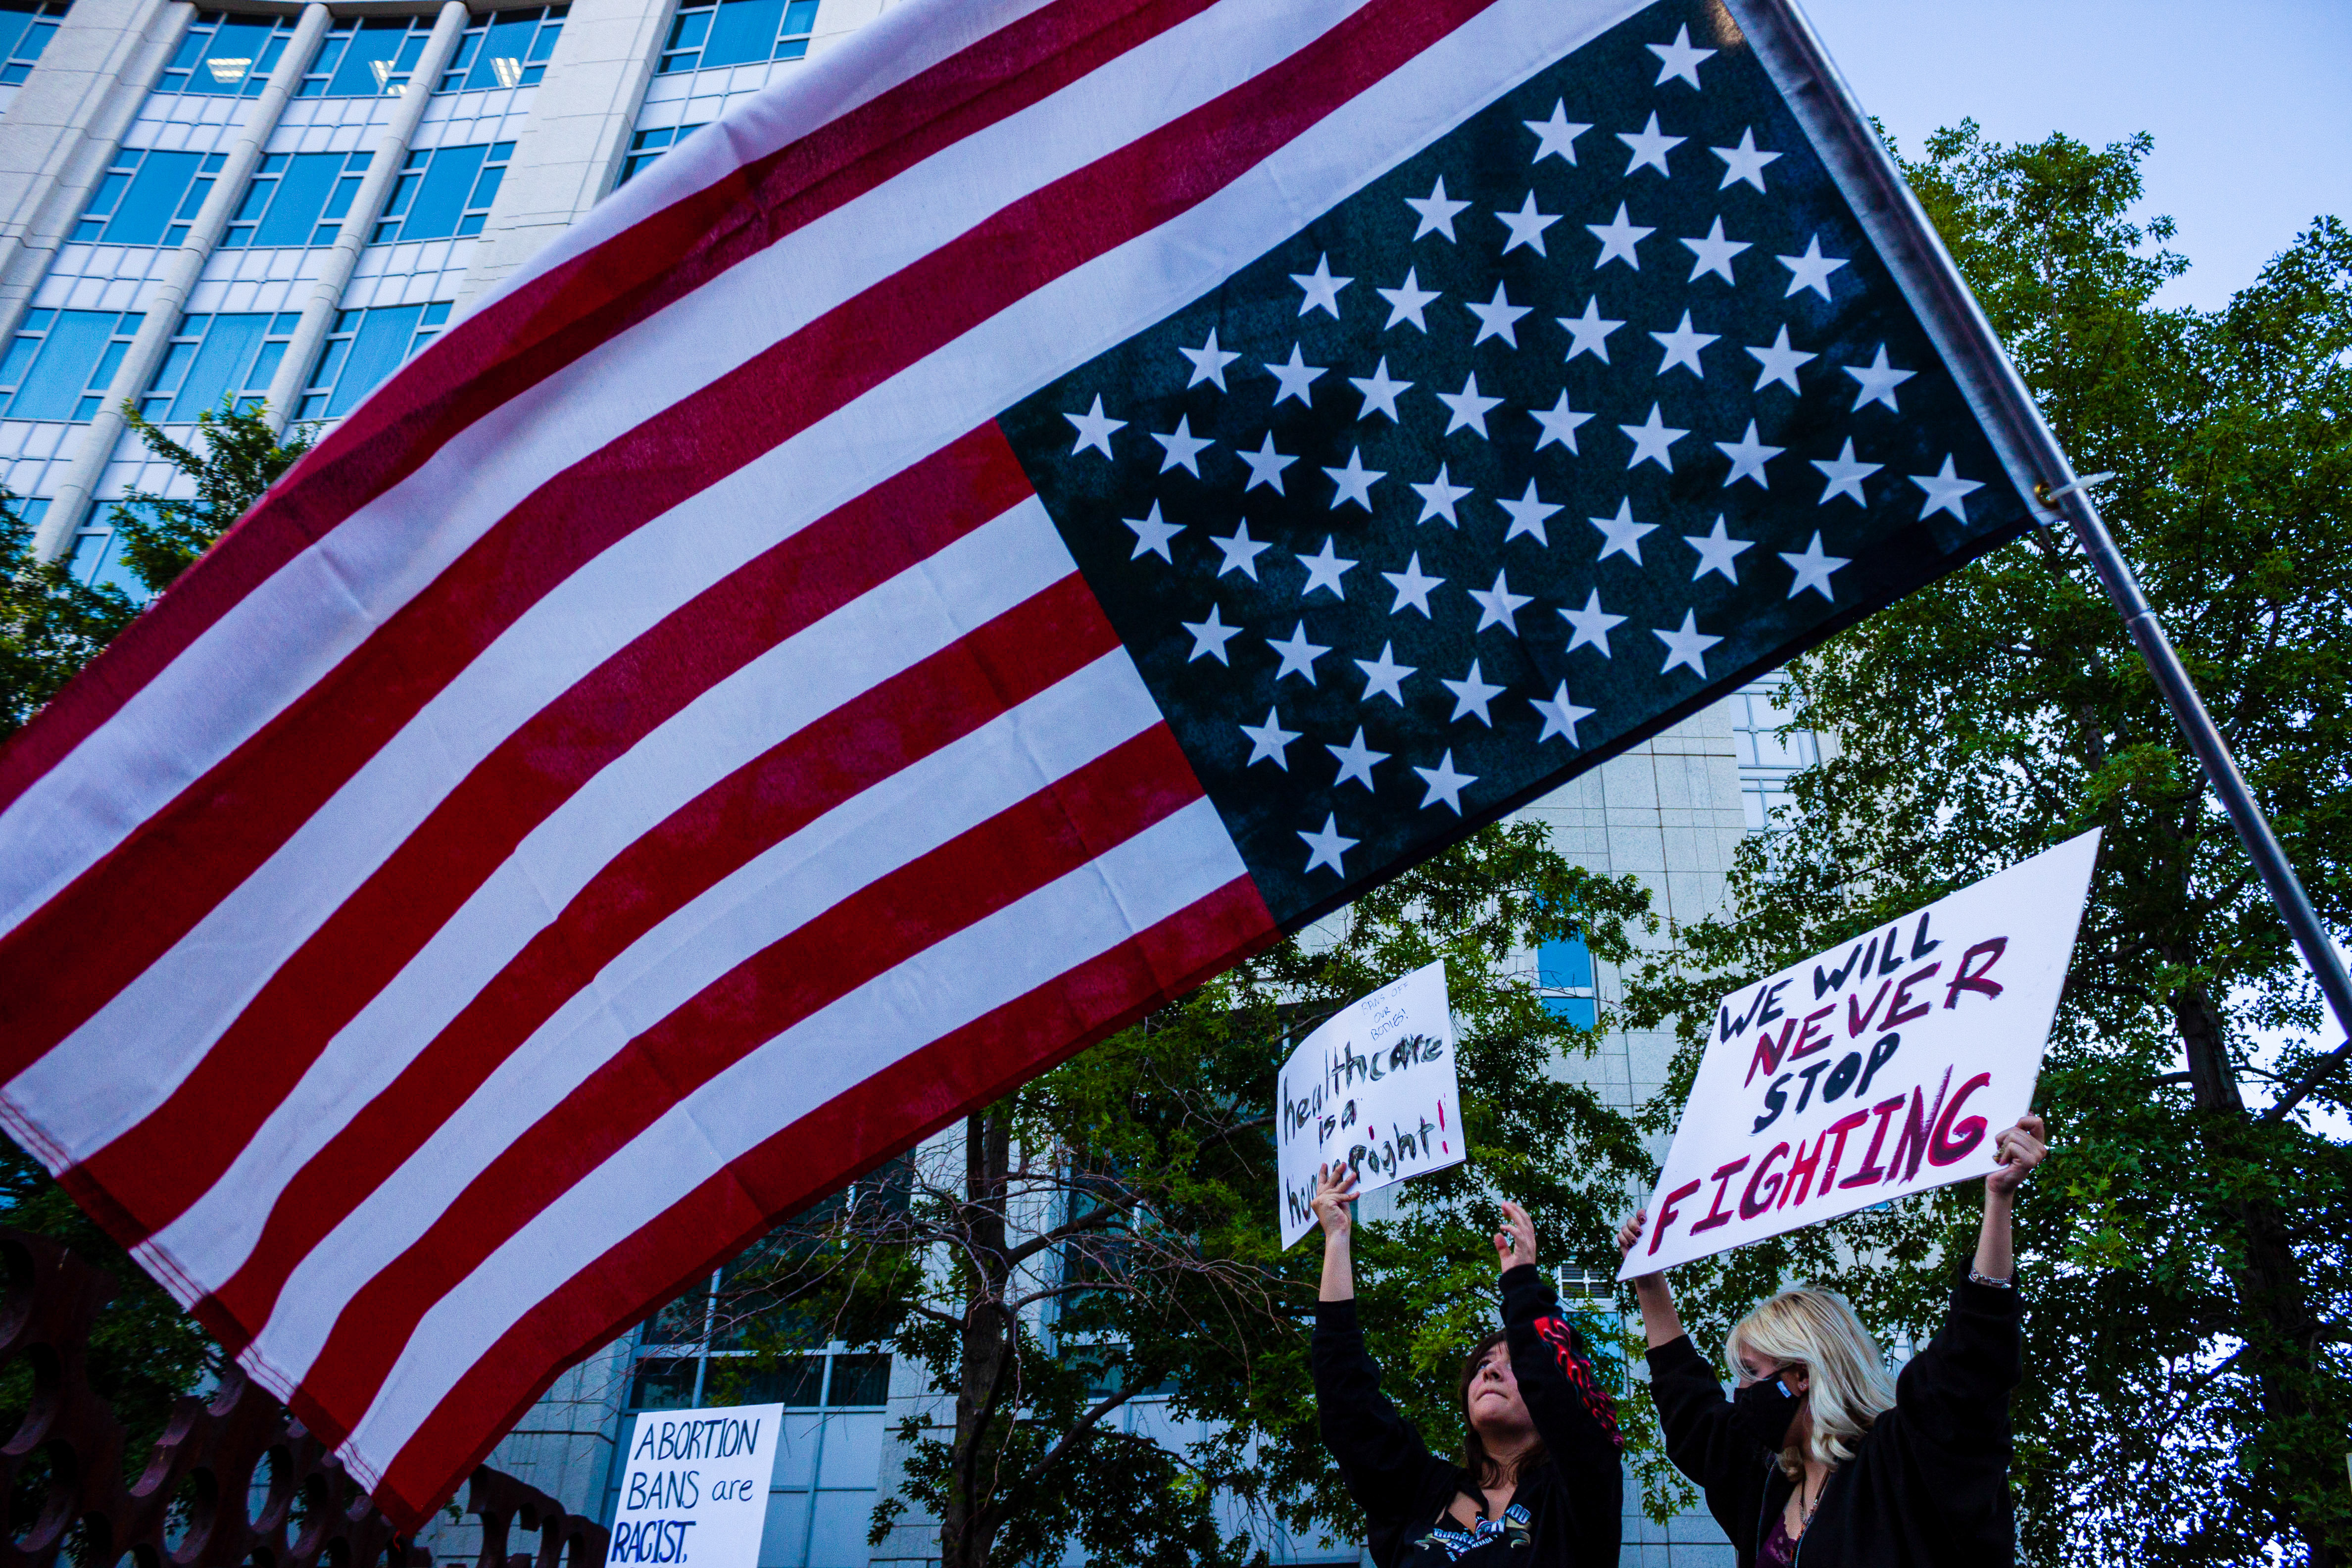 An upside-down American flag and signs including one reading “We will never stop fighting” amid a crowd of protesters in a city street.